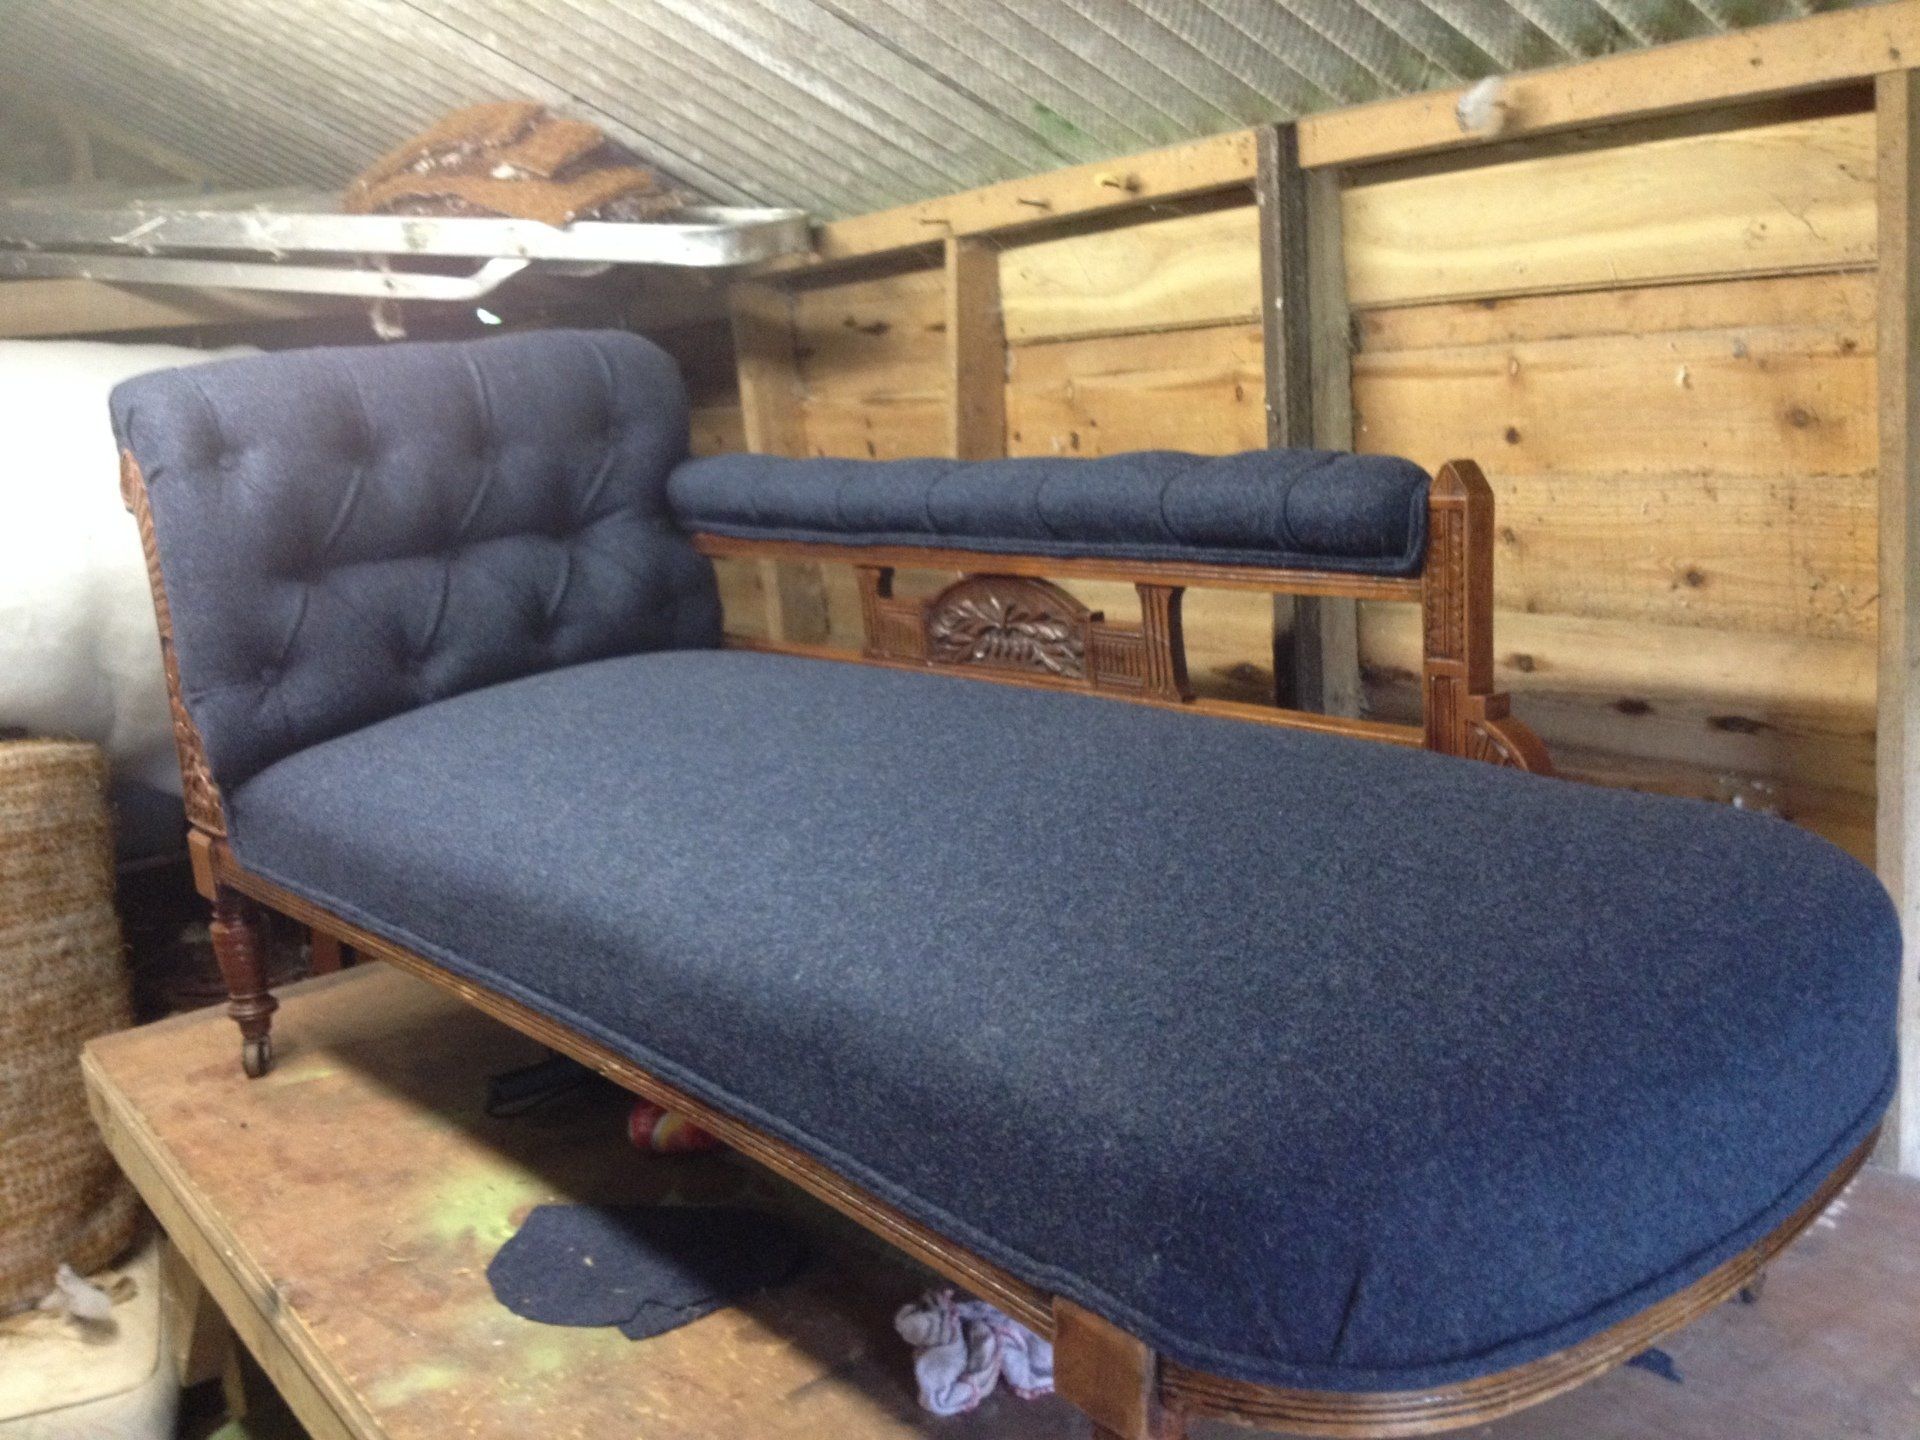 CHAISE LONGUE After